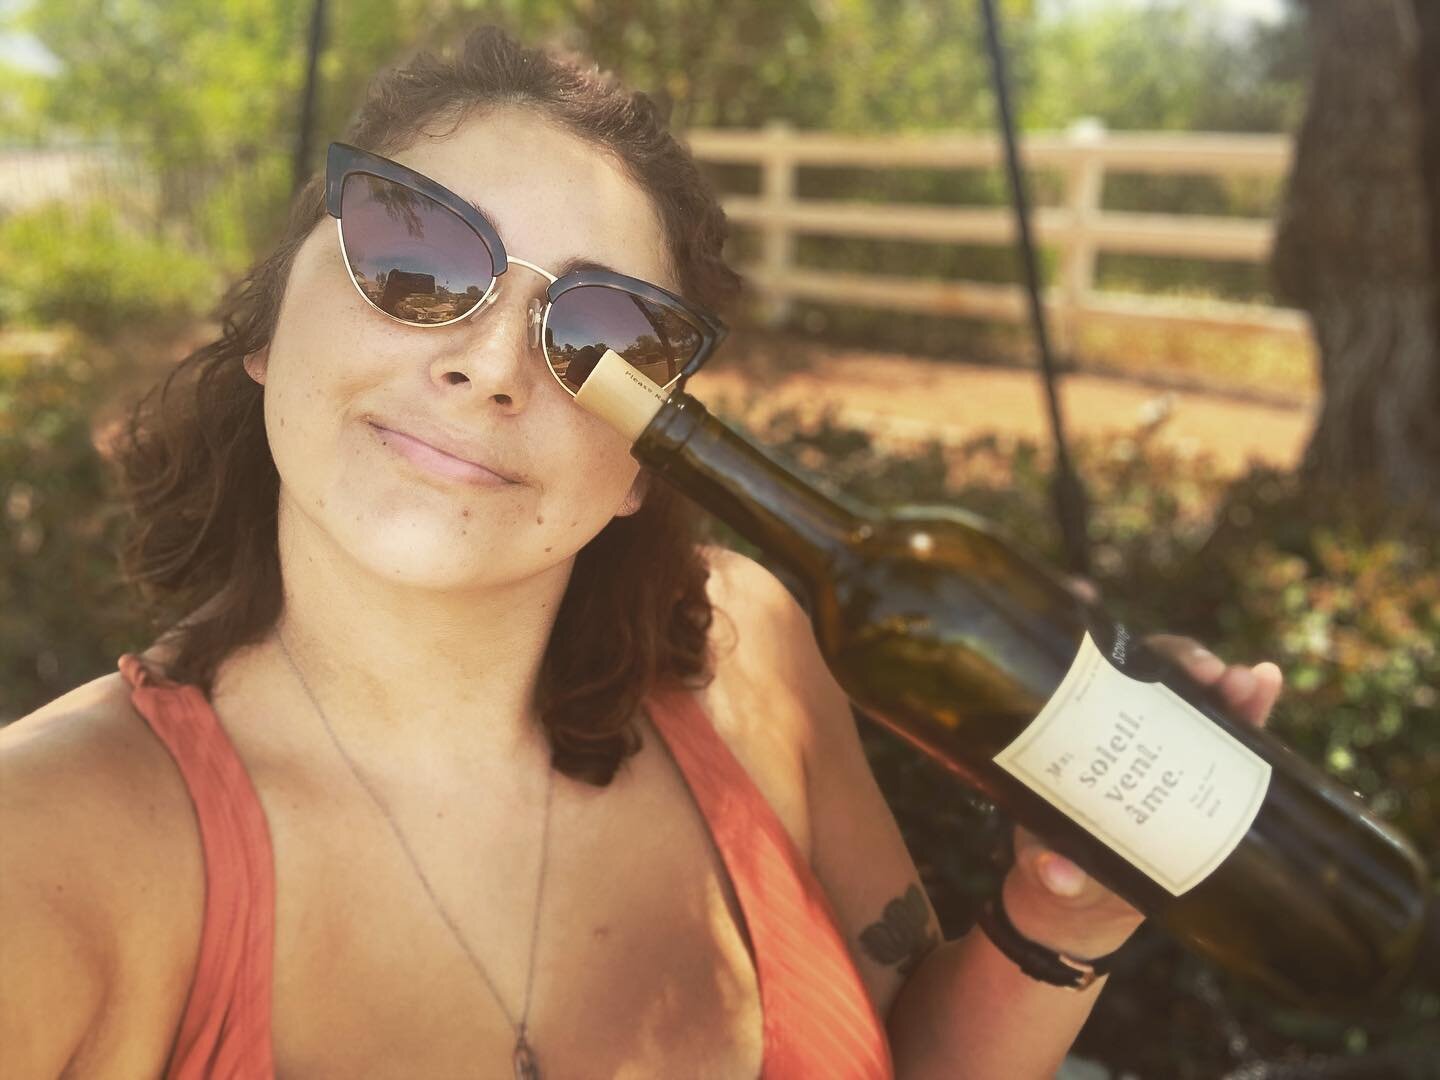 Hello Instagram world! It&rsquo;s Kaylee, your favorite Sommelier here, to let ya know that I am doing private in home tastings! Don&rsquo;t ya miss the precovid days where you can wine taste with your friends?? 
Let me help you discover your favorit